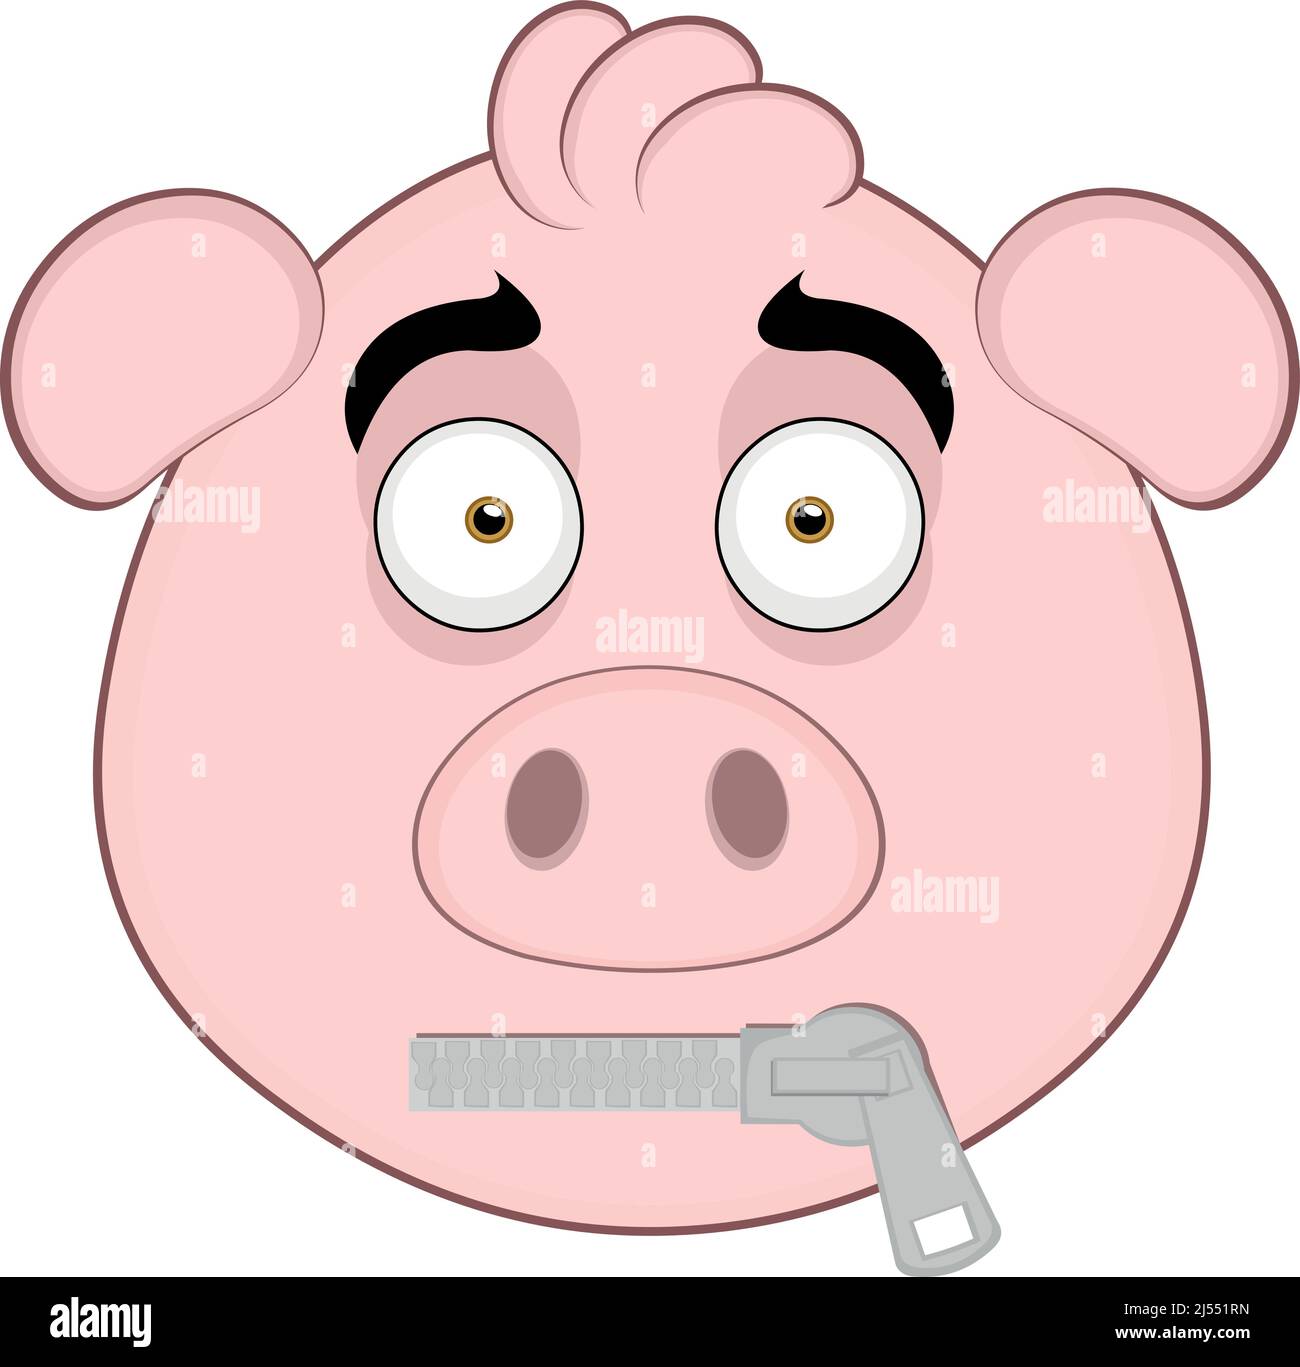 Vector illustration of the face of a cartoon pig with a zipper in the mouth Stock Vector